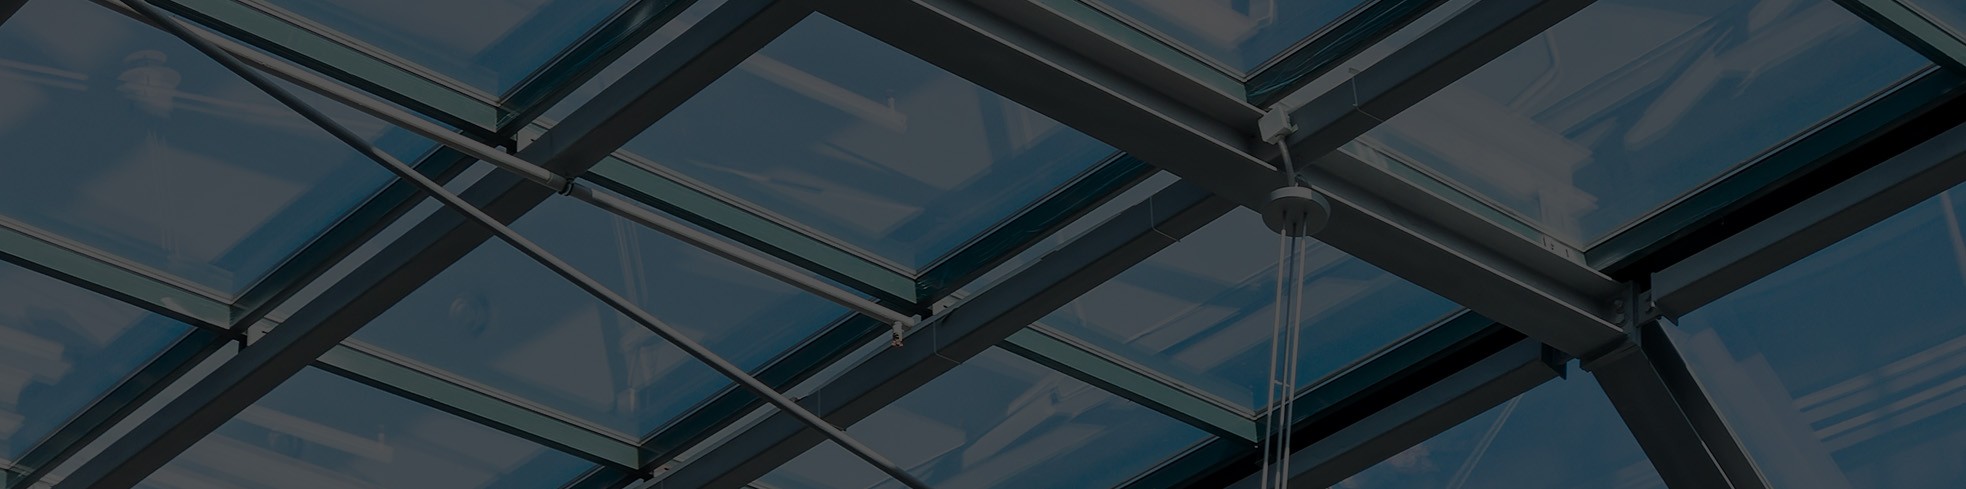 Glass roofing construction & repair services in Milwaukee, WI 